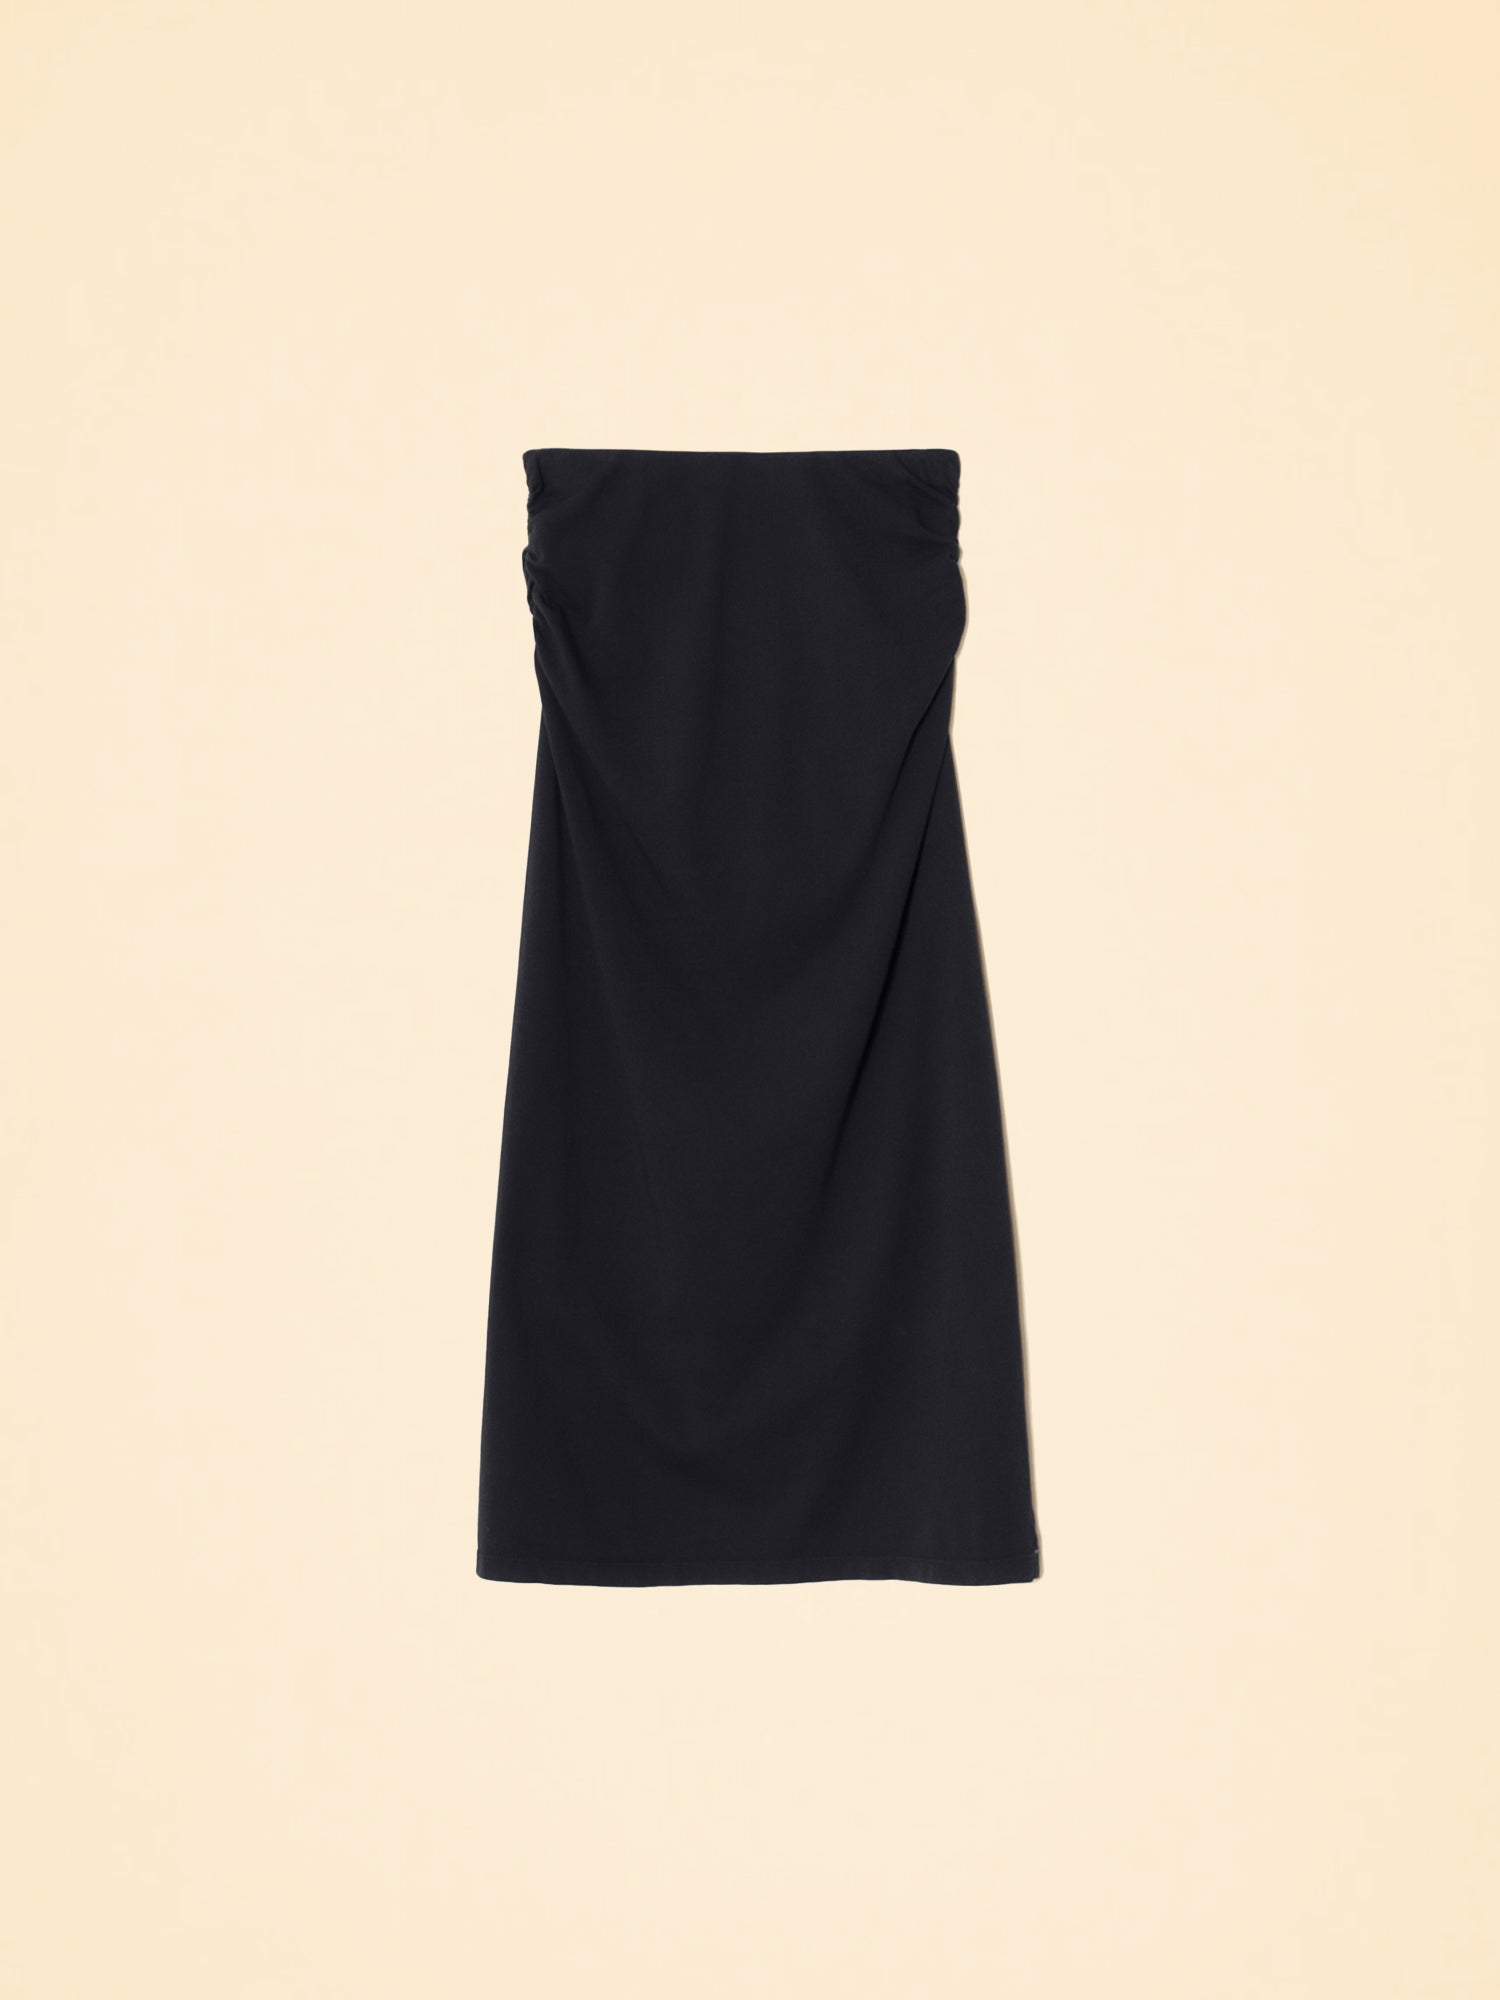 Xirena Lenny Skirt-Skirts-Misch-Boutique-Vancouver-Canada-misch.ca